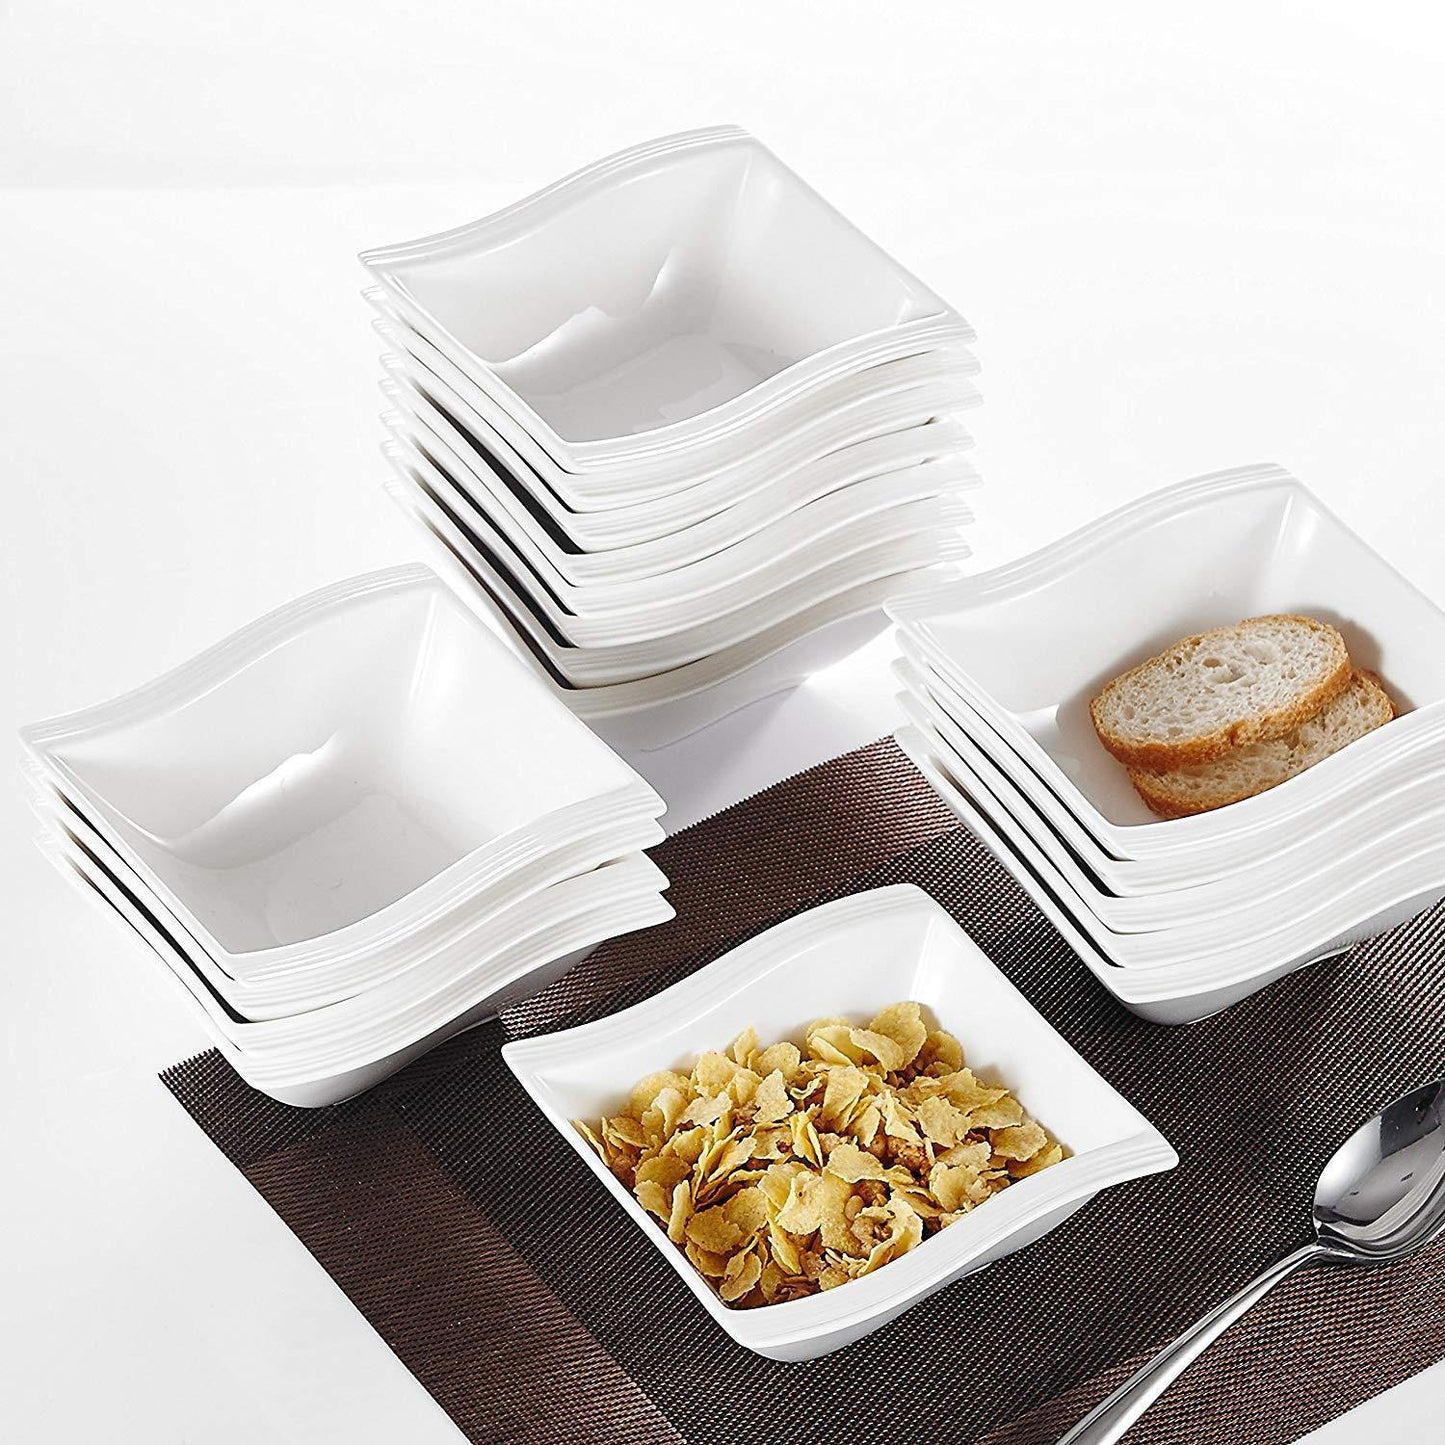 18-pieces White Porcelain Square  Bowls Set (12 ounce) - Nordic Side - 12, 18, Bowl, Bowls, Breakfast, Cereal, Dinner, Dinnerware, Household, MALACASA, Oatmeal, Ounce, pieces, Porcelain, Sets